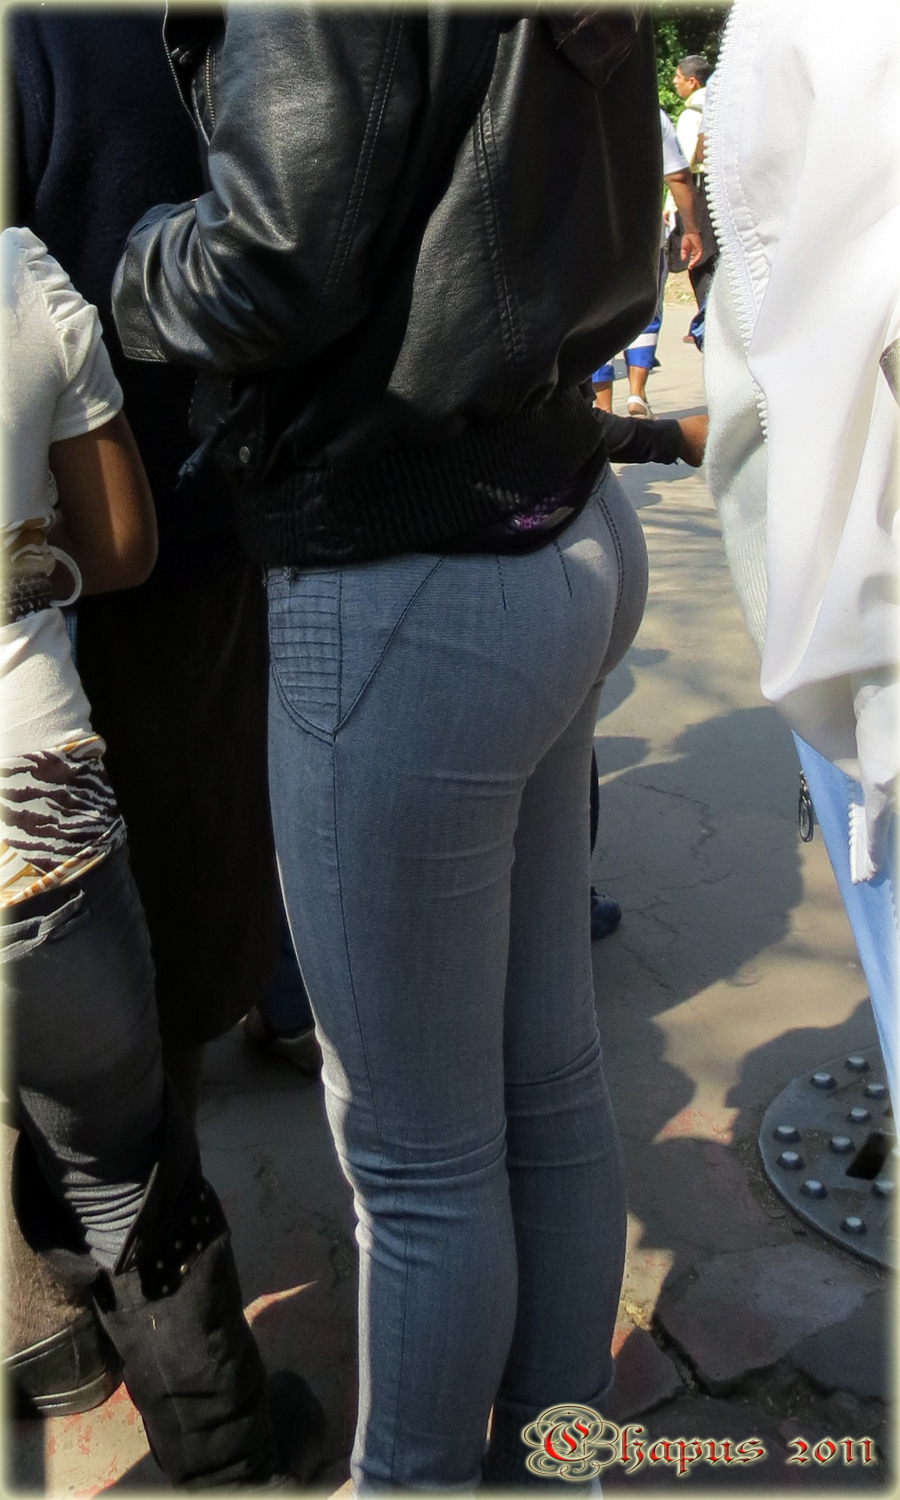 Perfect Butt Jeans Candid